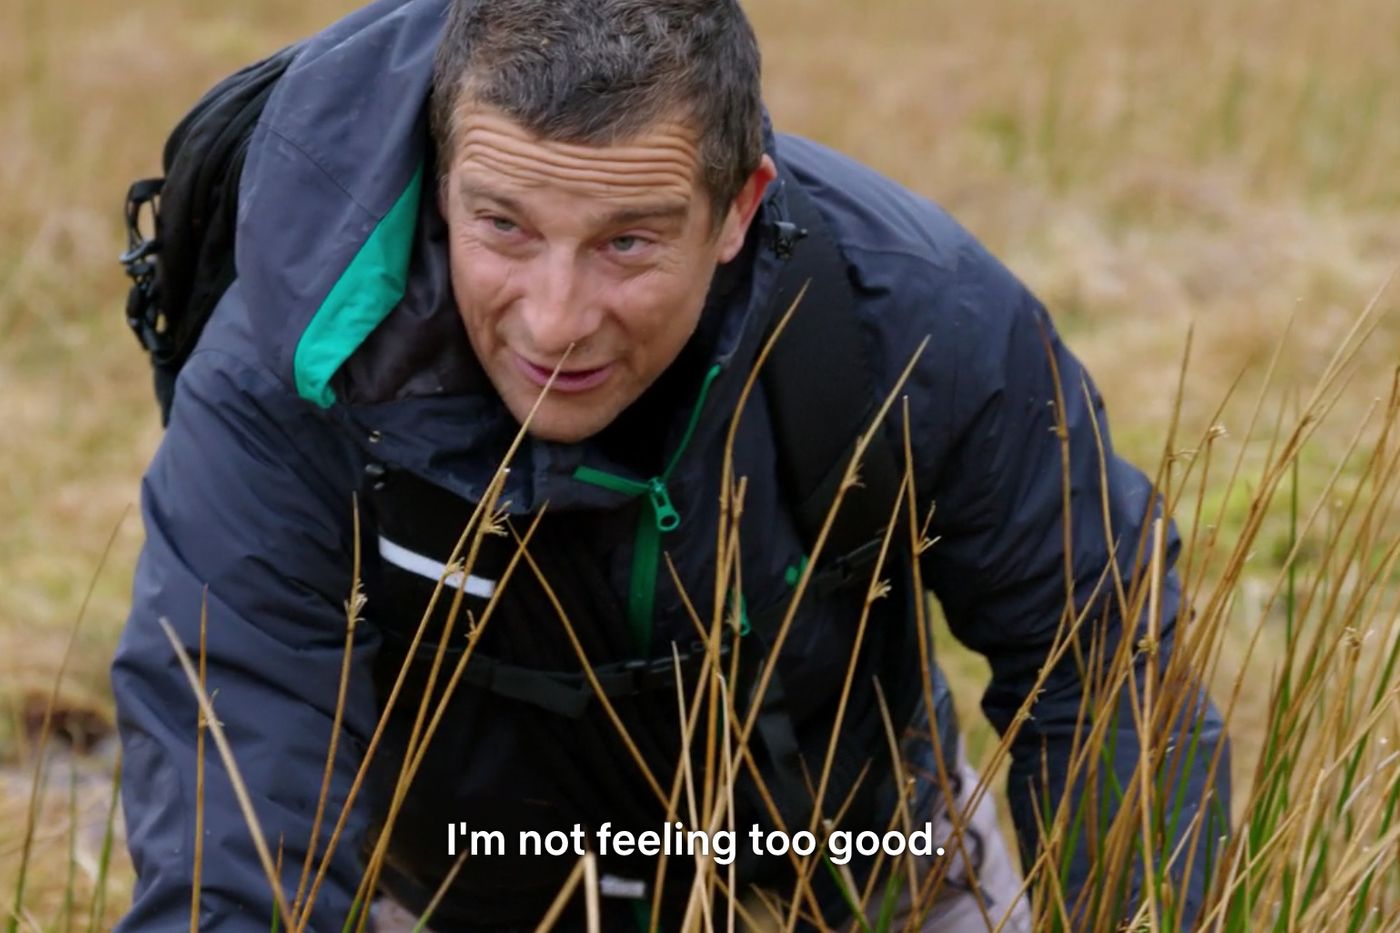 11 things you probably never knew about Bear Grylls, from his real name to  the film that makes him cry